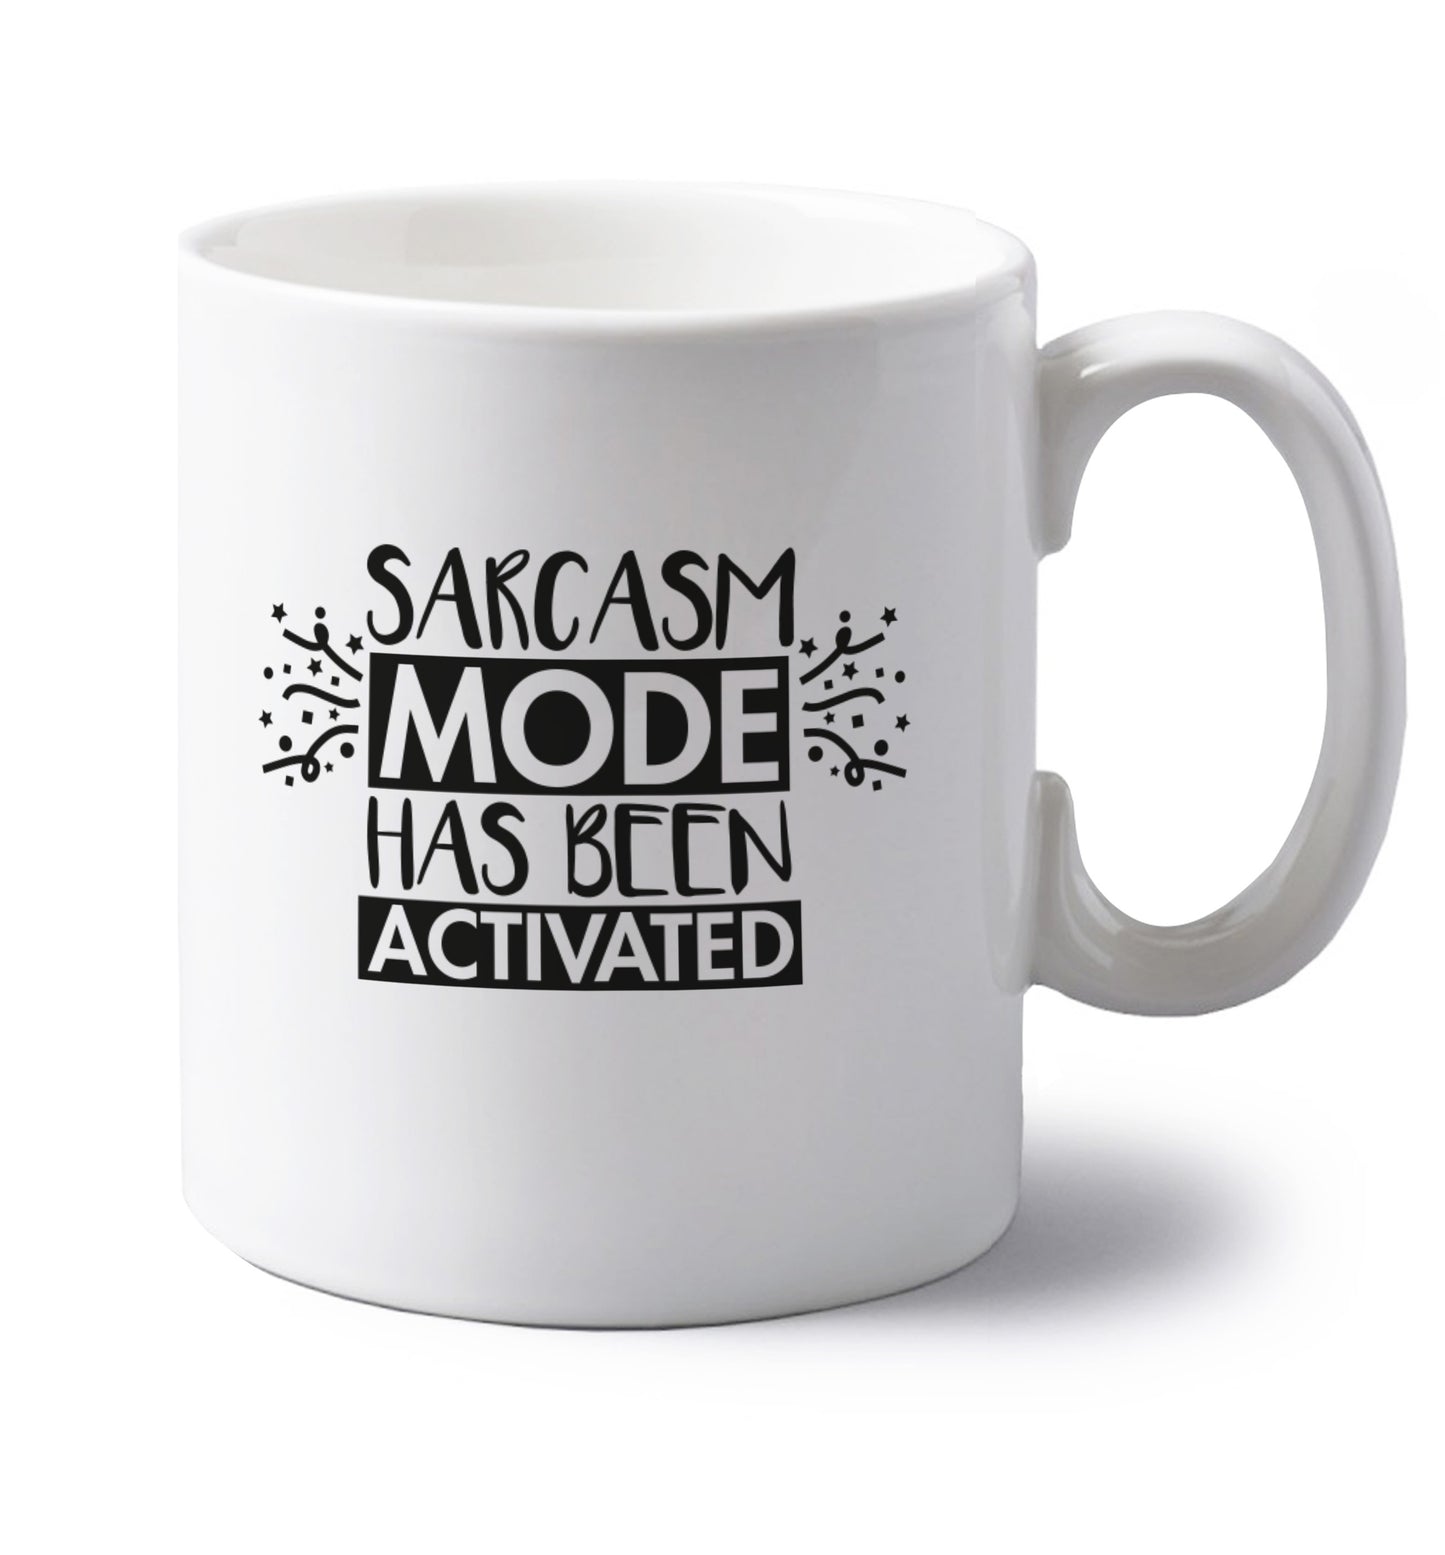 Sarcarsm mode has been activated left handed white ceramic mug 